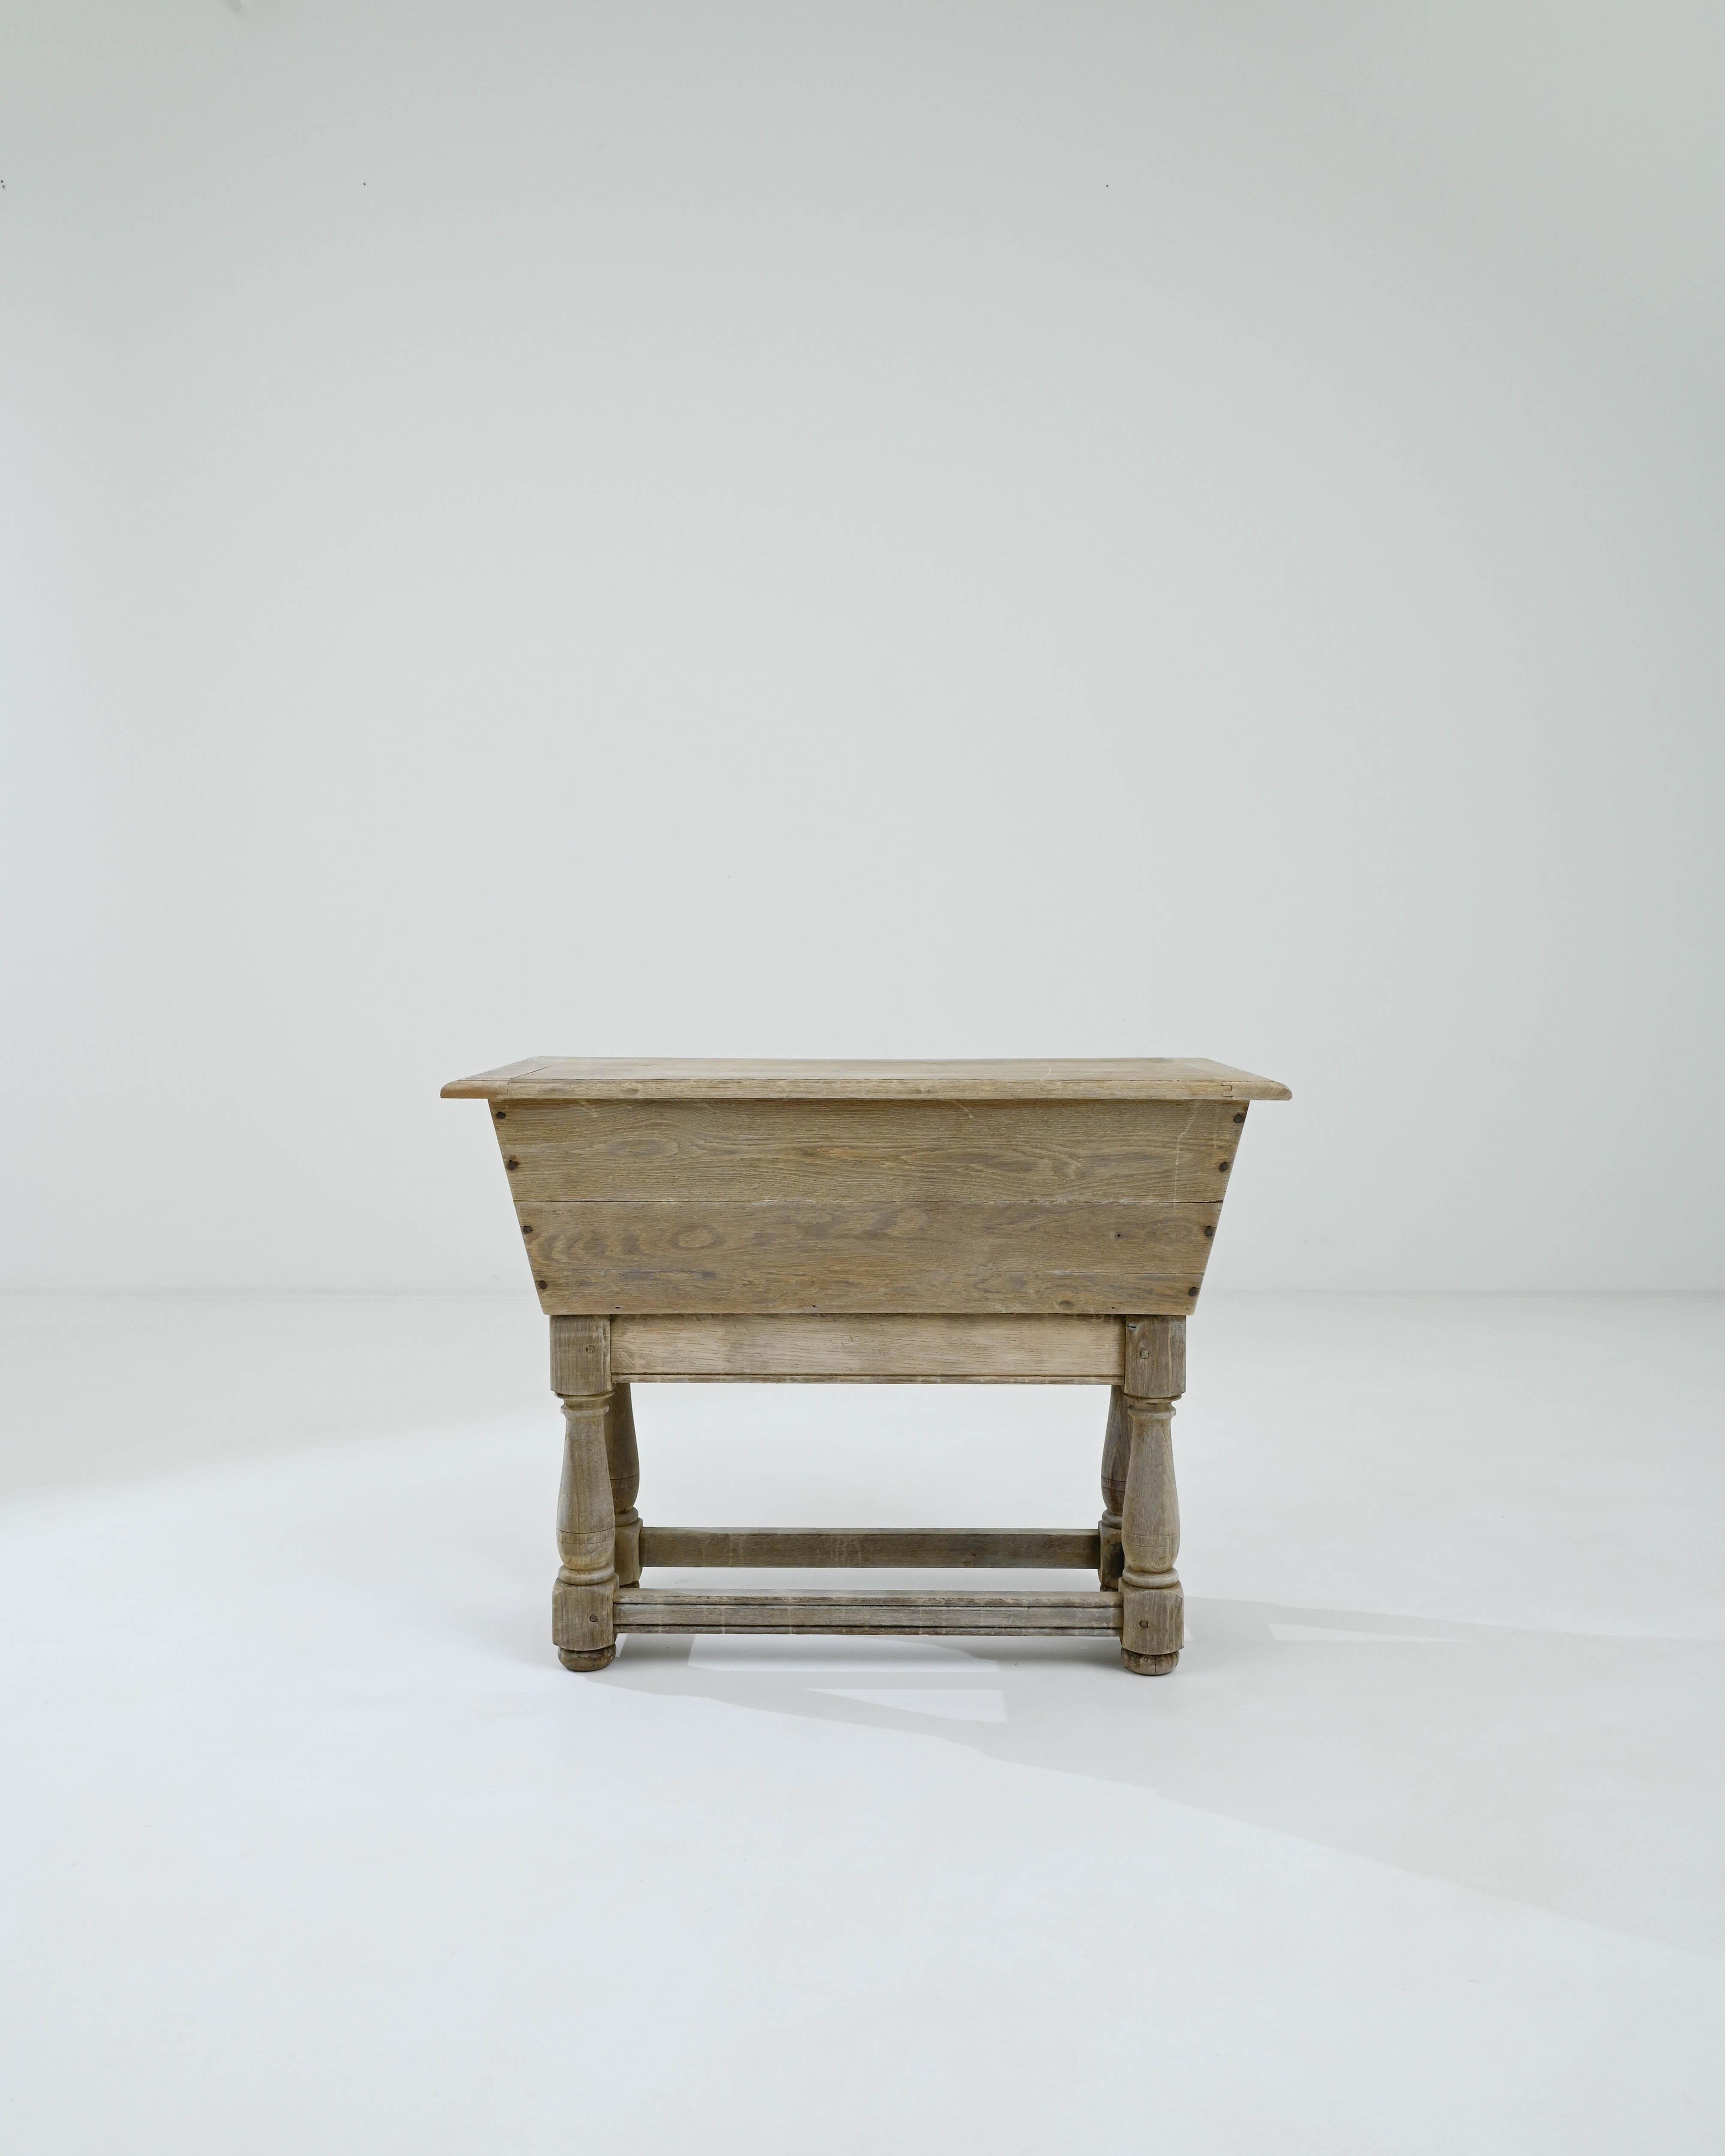 Handsome and versatile, this antique oak side table combines provincial simplicity with warm natural finish. Hand-built in France in the early 1800s, the rectangular tabletop sits atop a deep storage compartment, originally used for storing rising